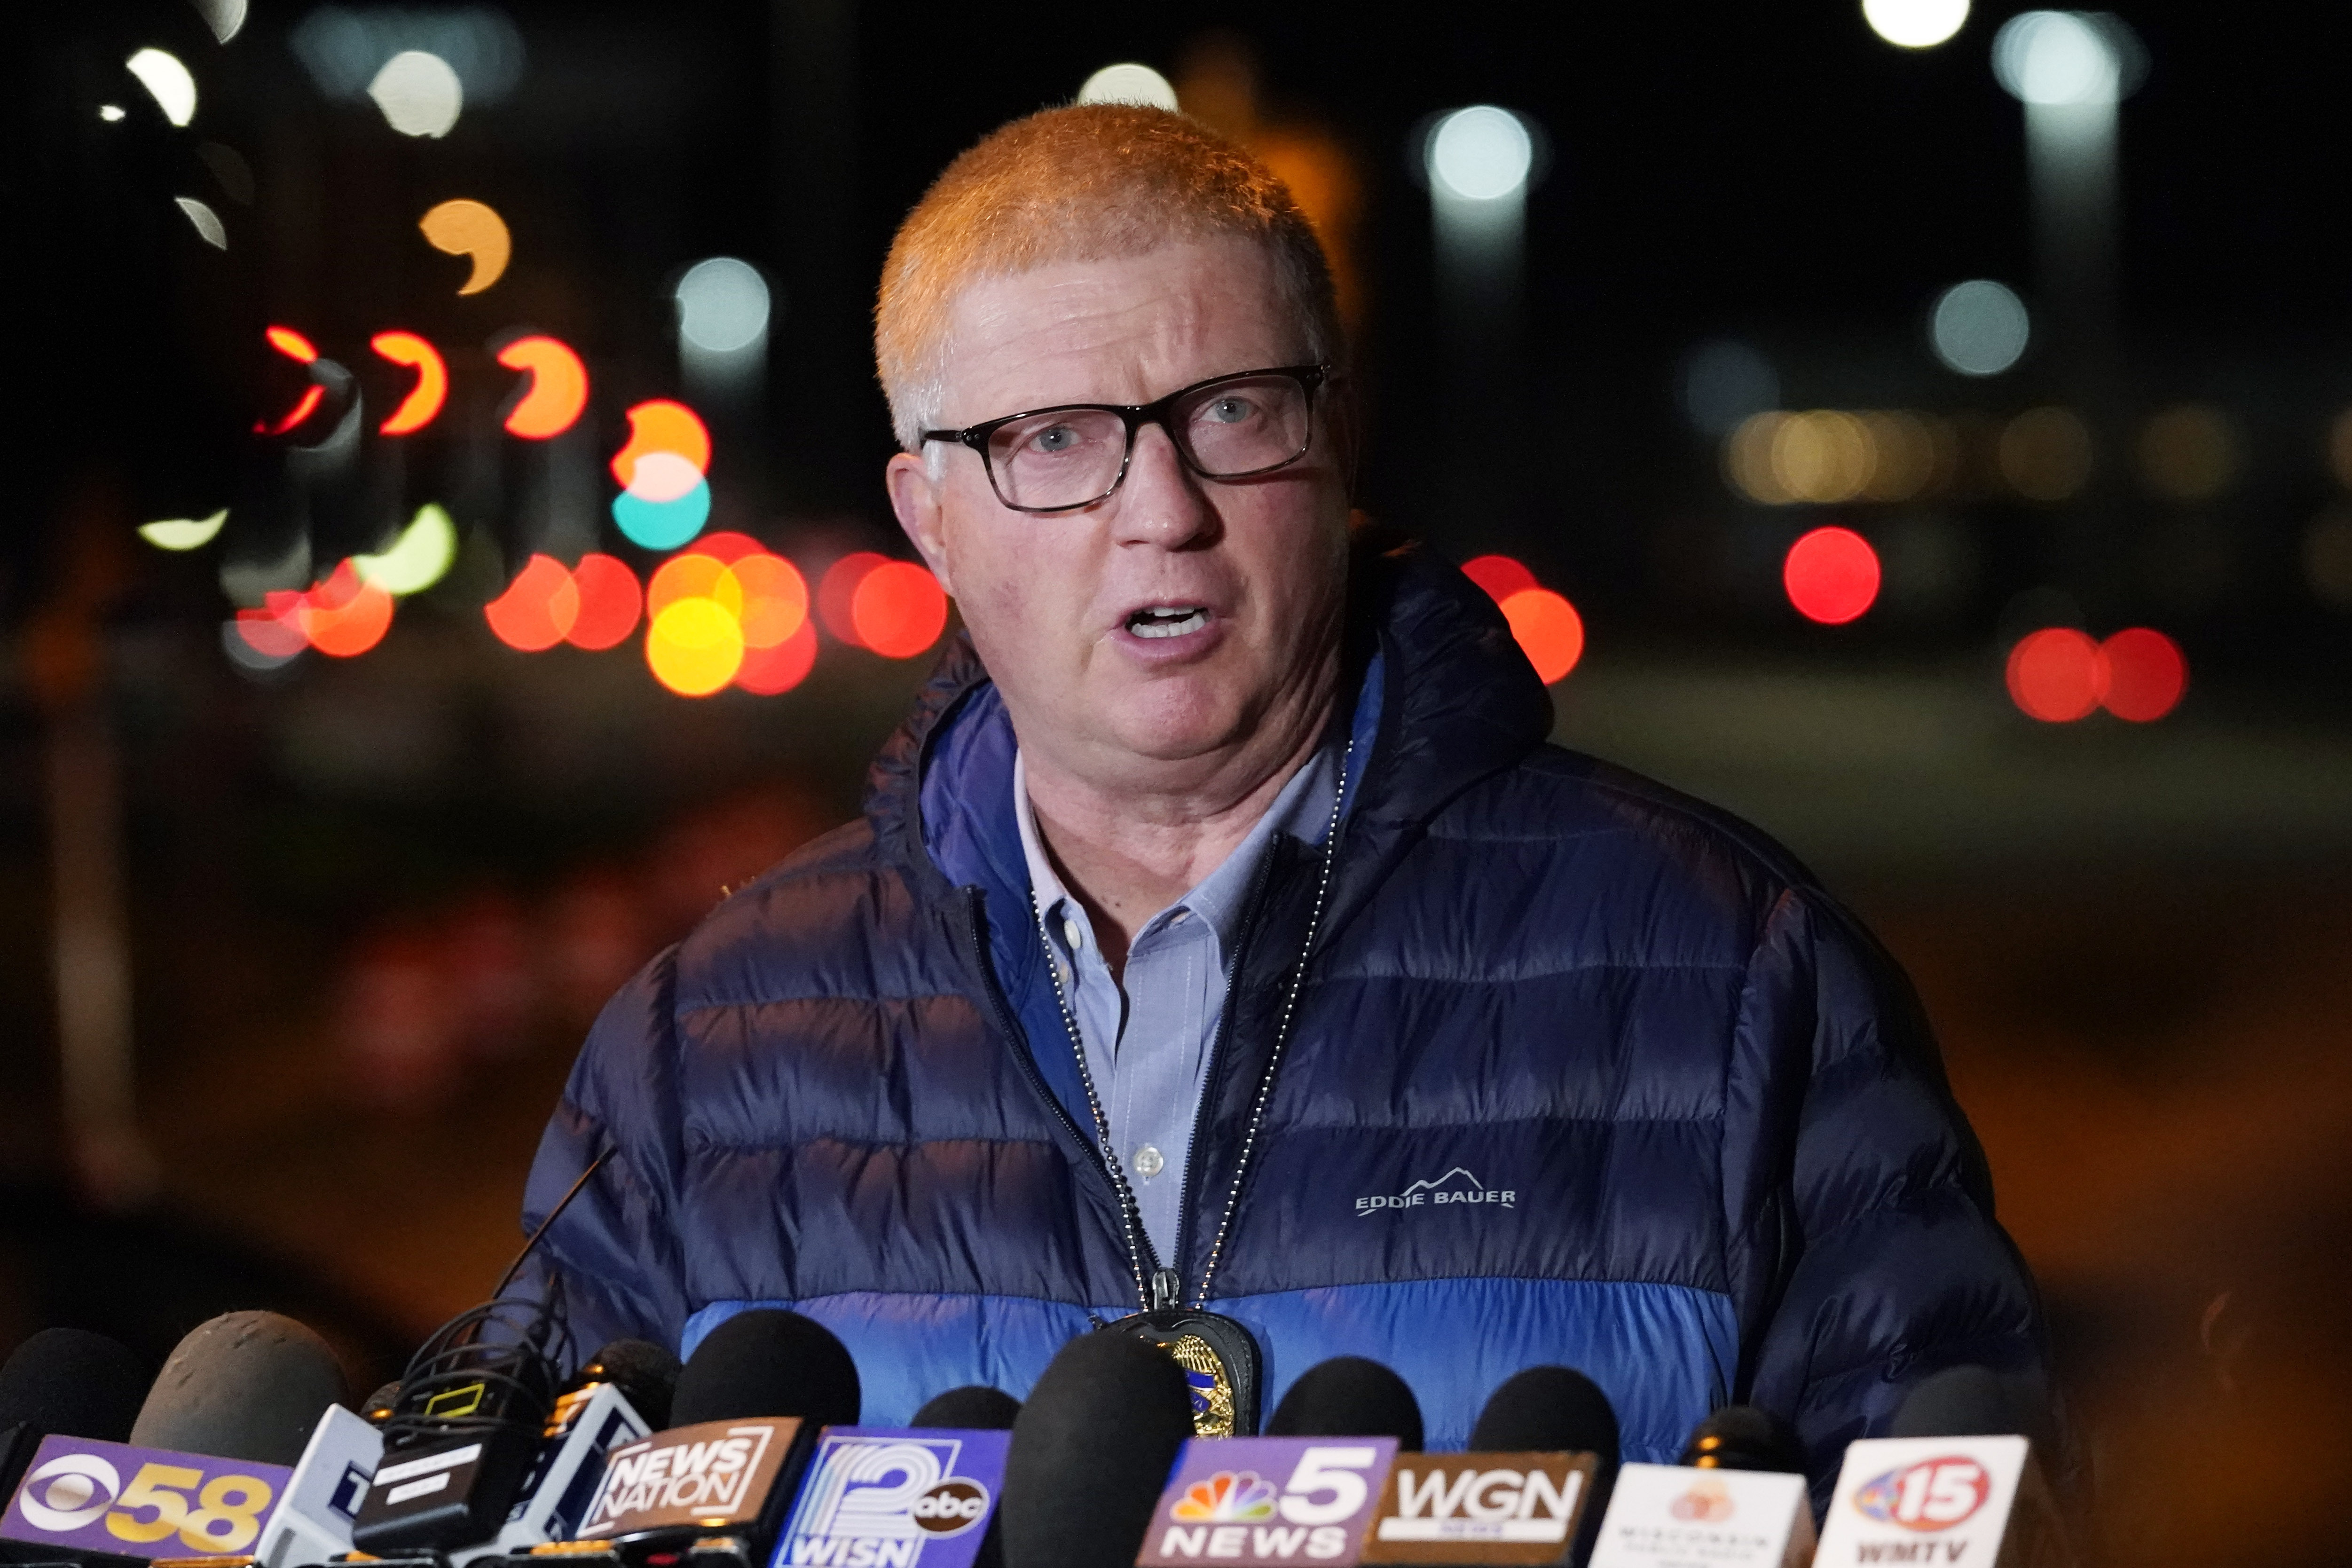 Wauwatosa Police chief Barry Weber speaks at a news conference, Friday, Nov. 20, 2020, in Wauwatosa, Wis. Multiple people were shot Friday afternoon at the Mayfair Mall in Wauwatosa, Wis., and police are still searching for the shooter. Photo: AP